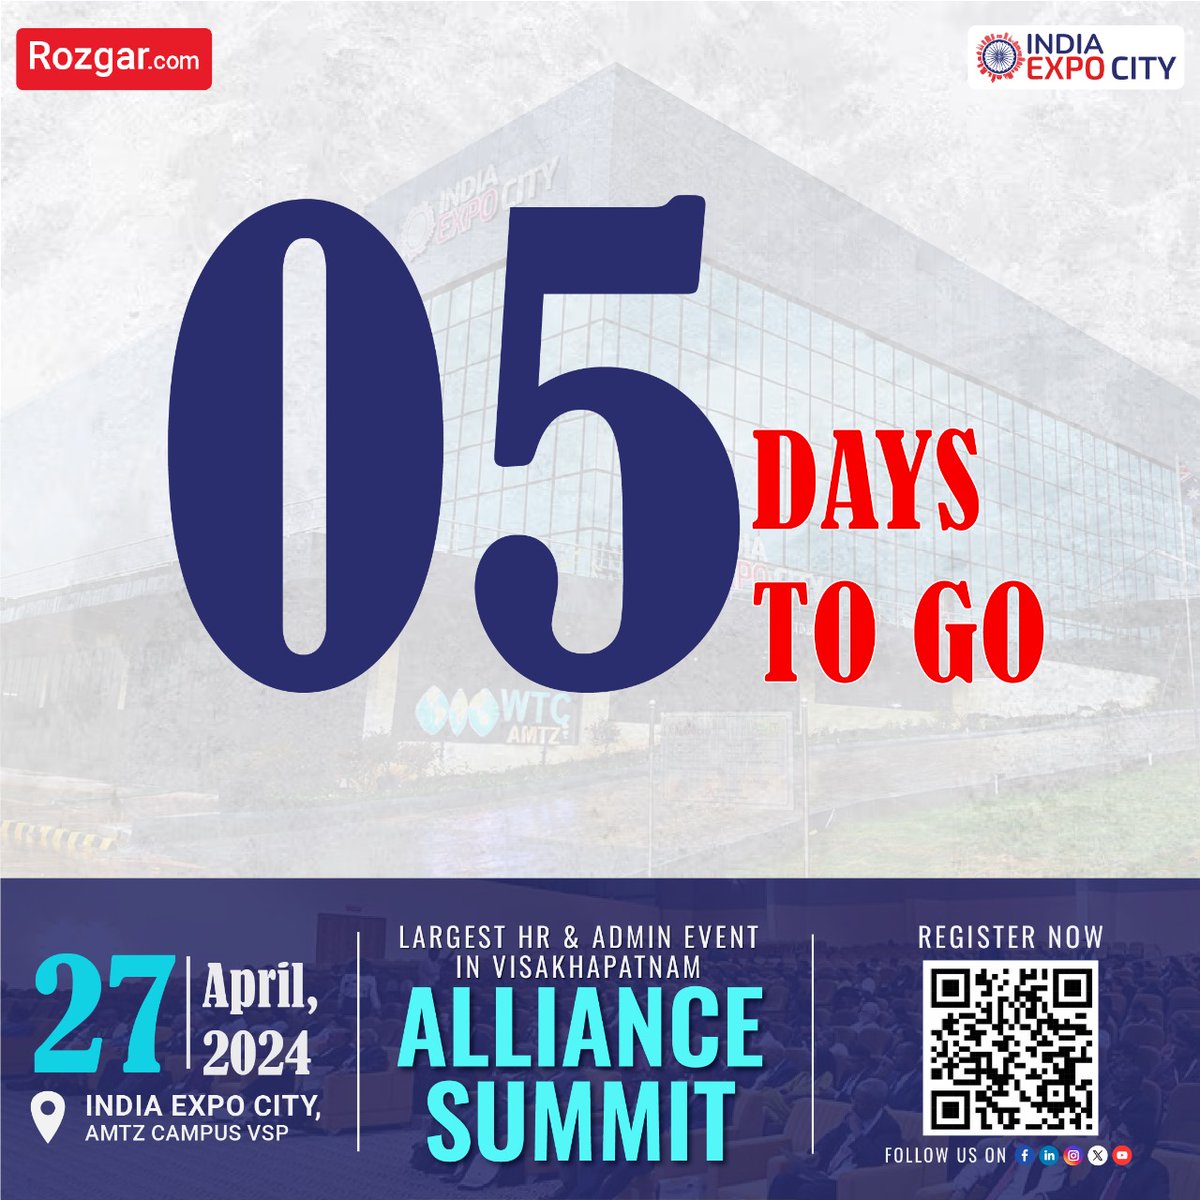 Only 5 days left until the #AllianceSummit! 🎉 
Don't miss out on this amazing #opportunity to connect, learn, and thrive. 🚀

Secure your spot today! - rozgar.com/alliance-summit

#indiaexpocity #iec #events #summit #vizag #visakhapatnam #business #networking #amtz #community